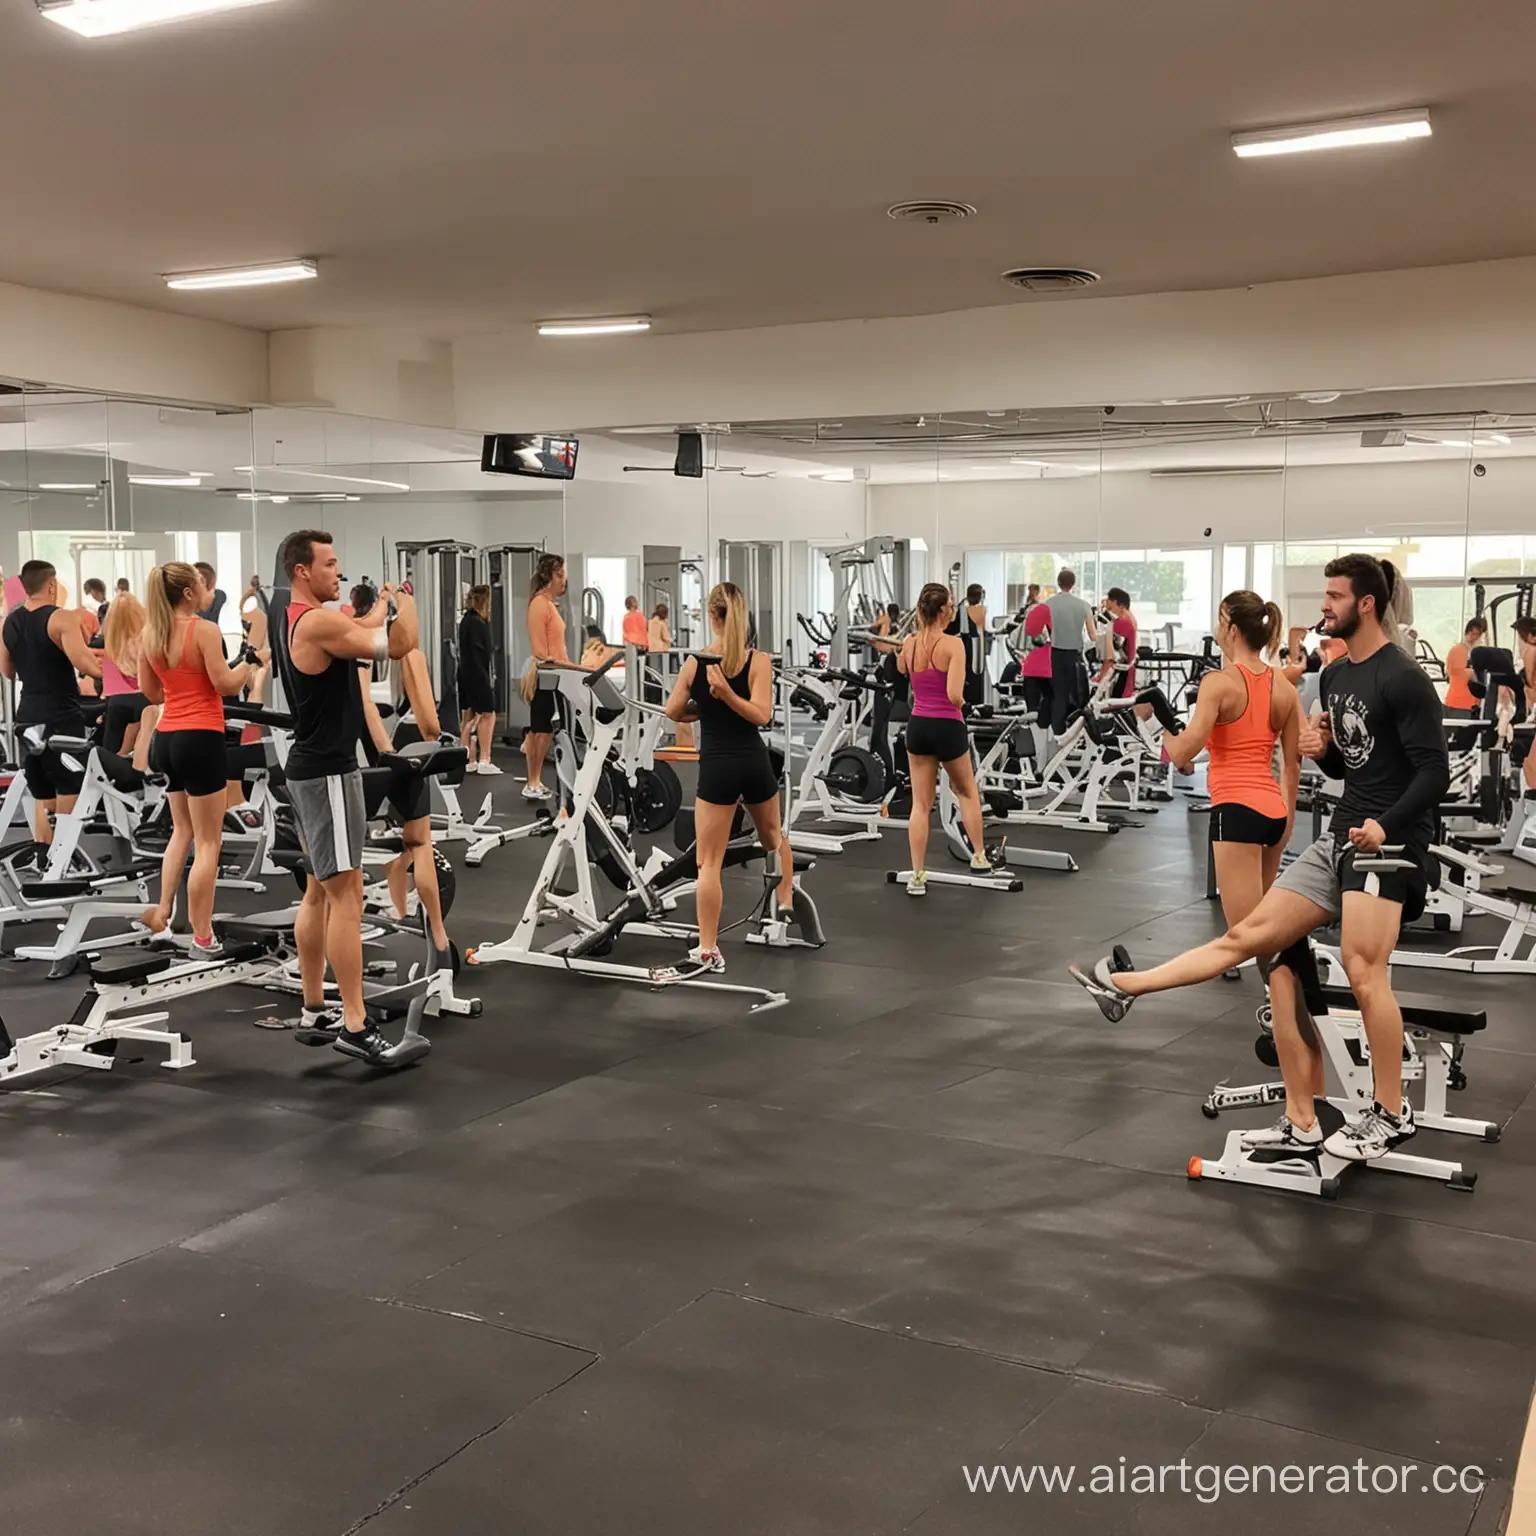 Diverse-Group-Exercising-in-a-Modern-Gym